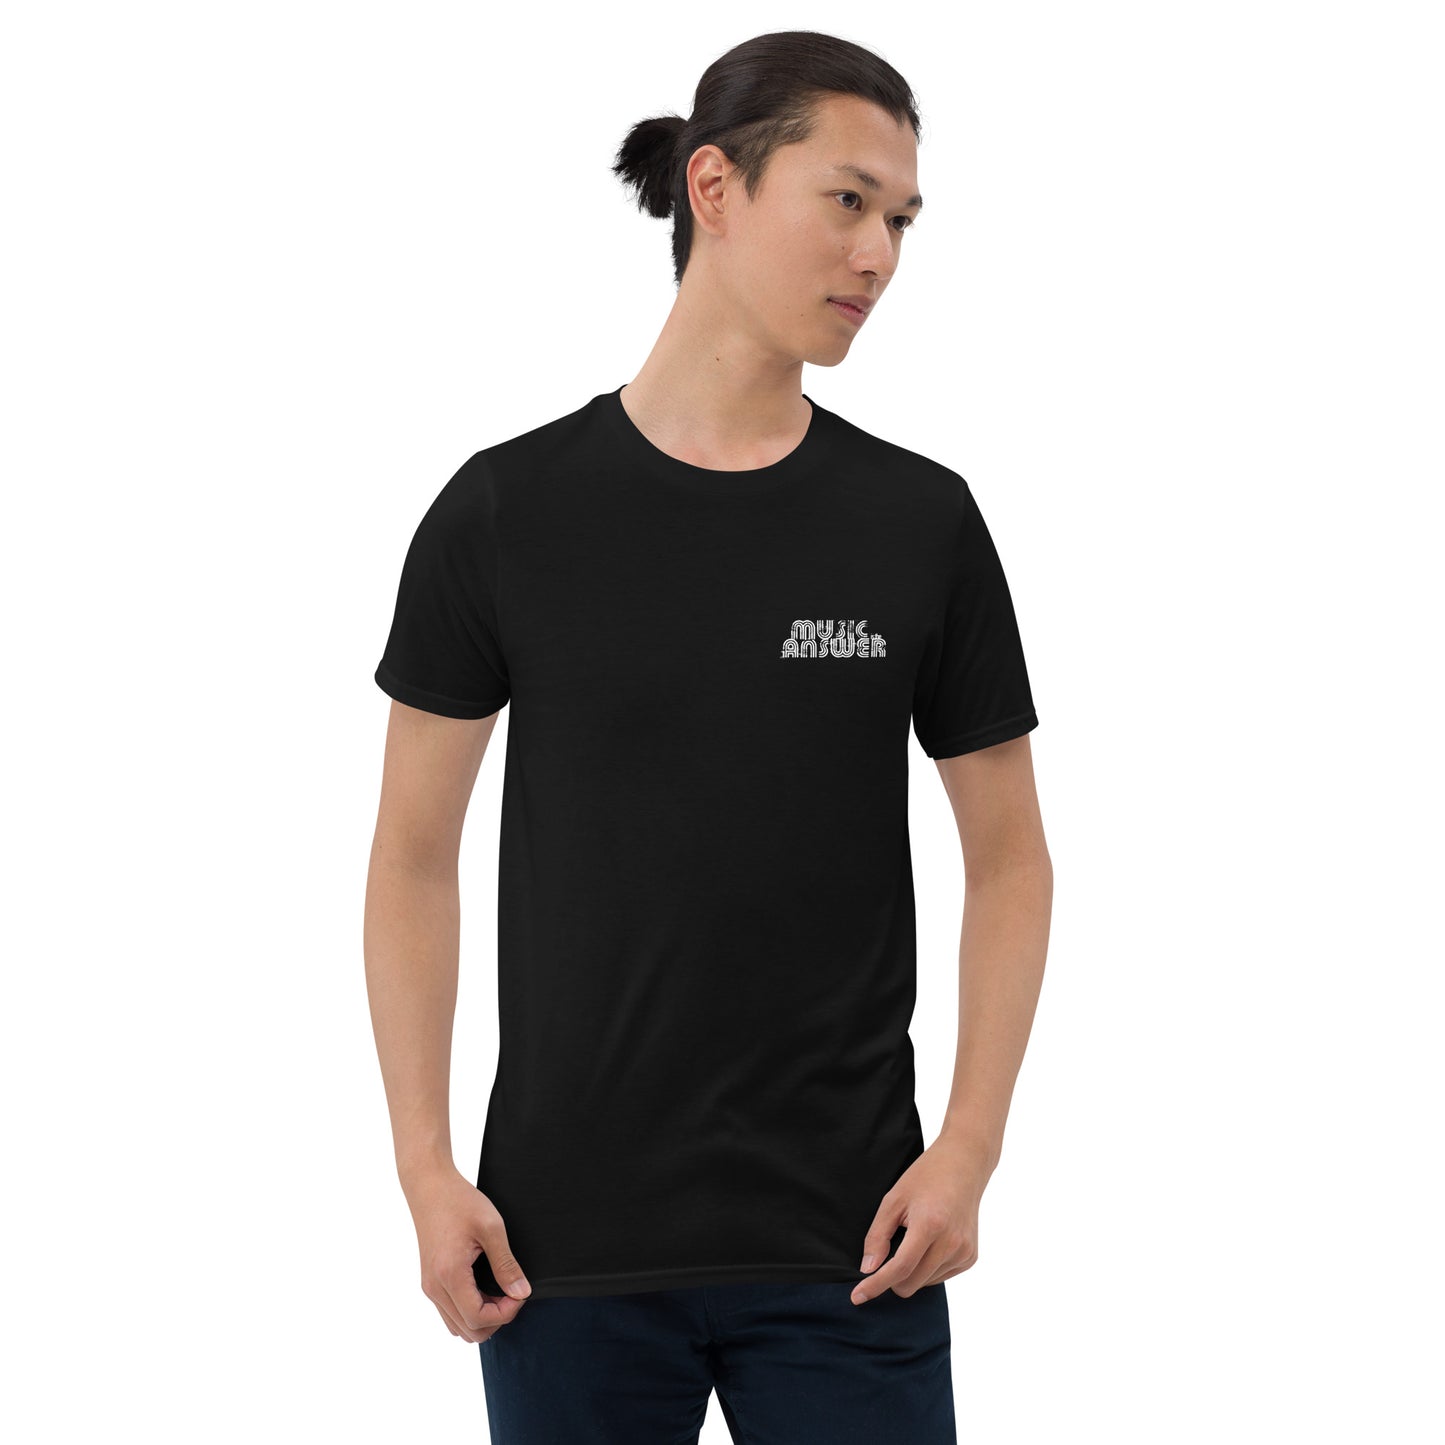 Music is the Answer unisex T-shirt